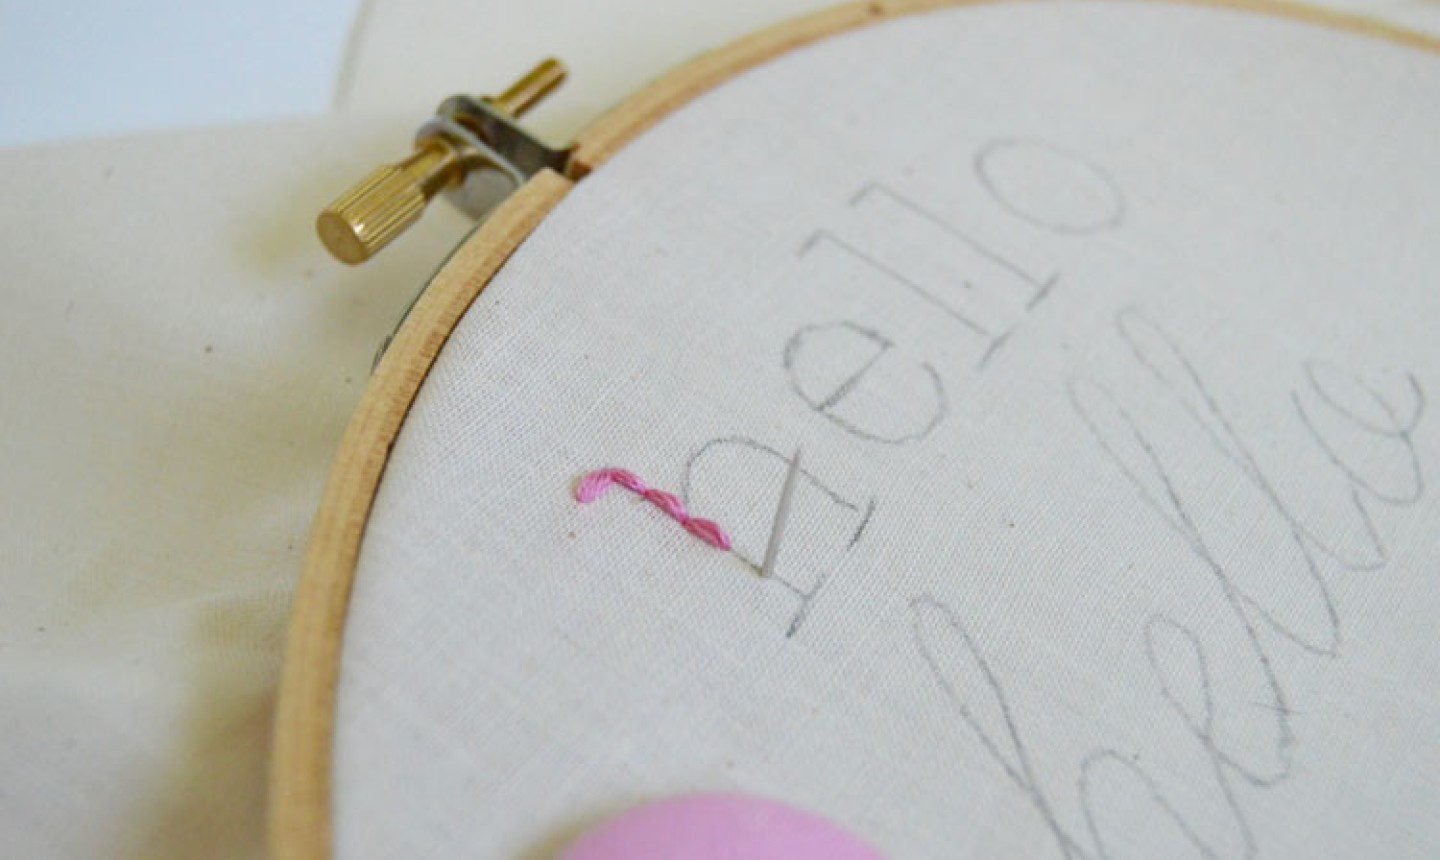 Backstitch embroider the word hello